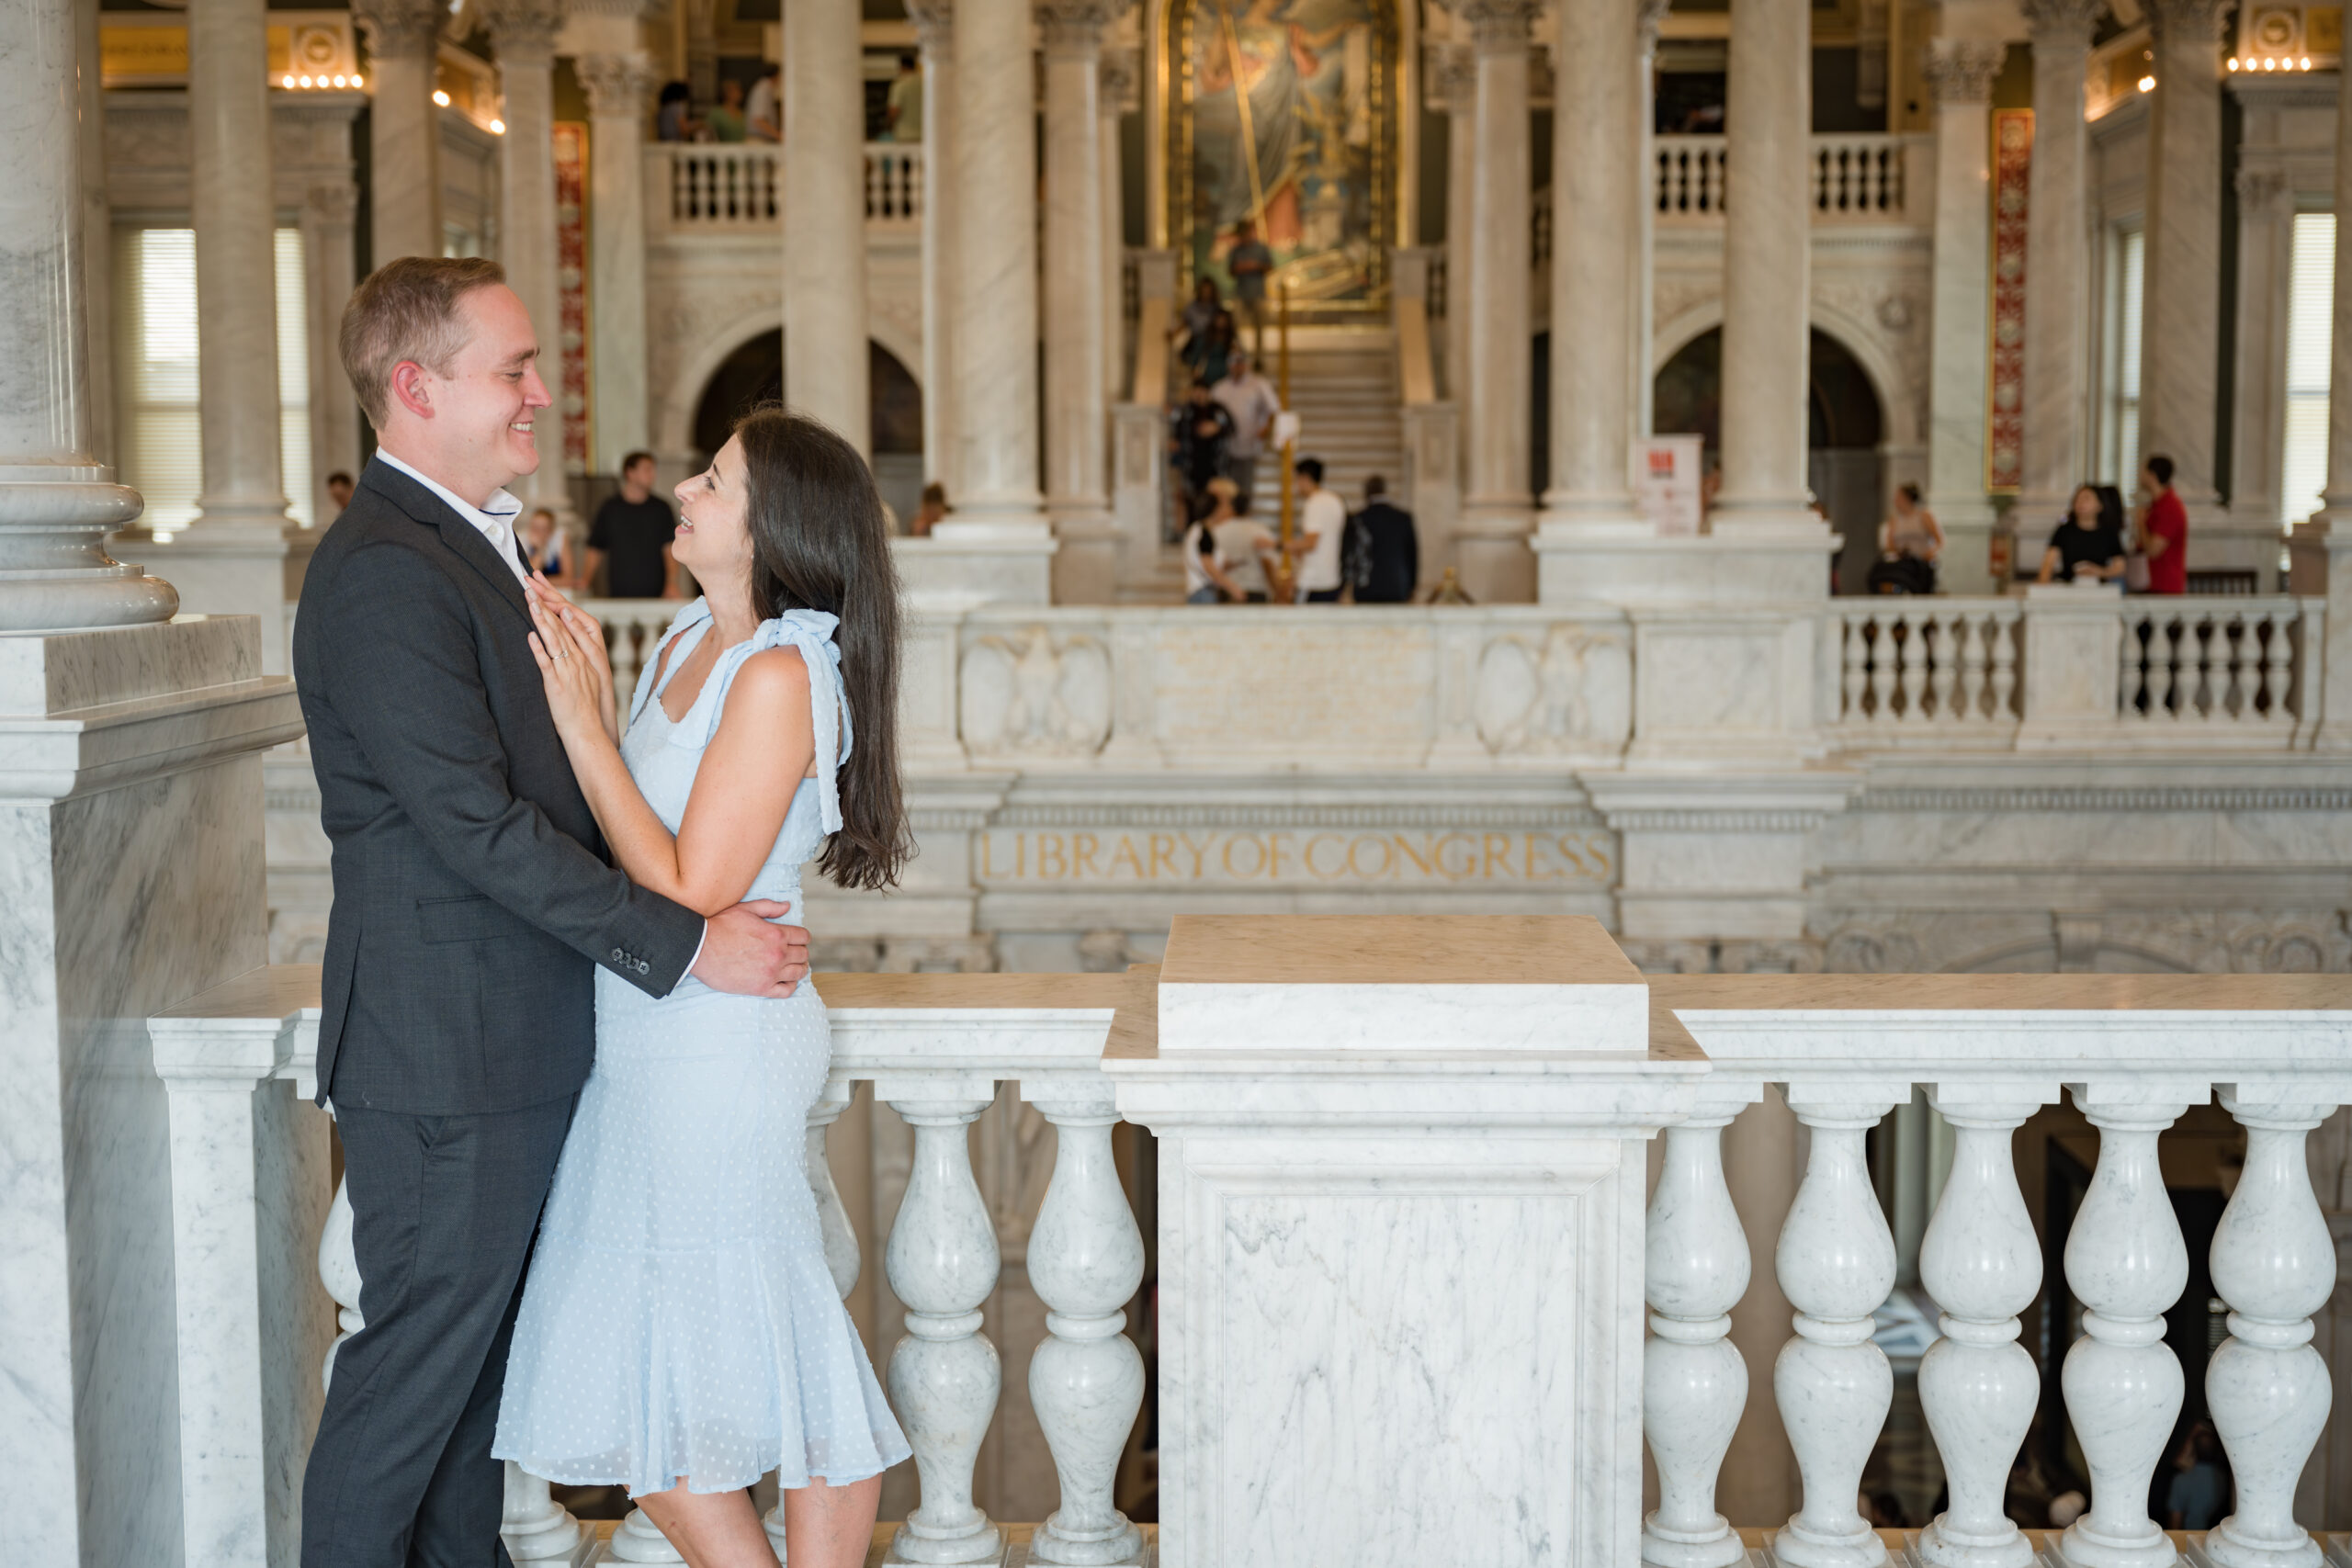 engagement photo at library of congress